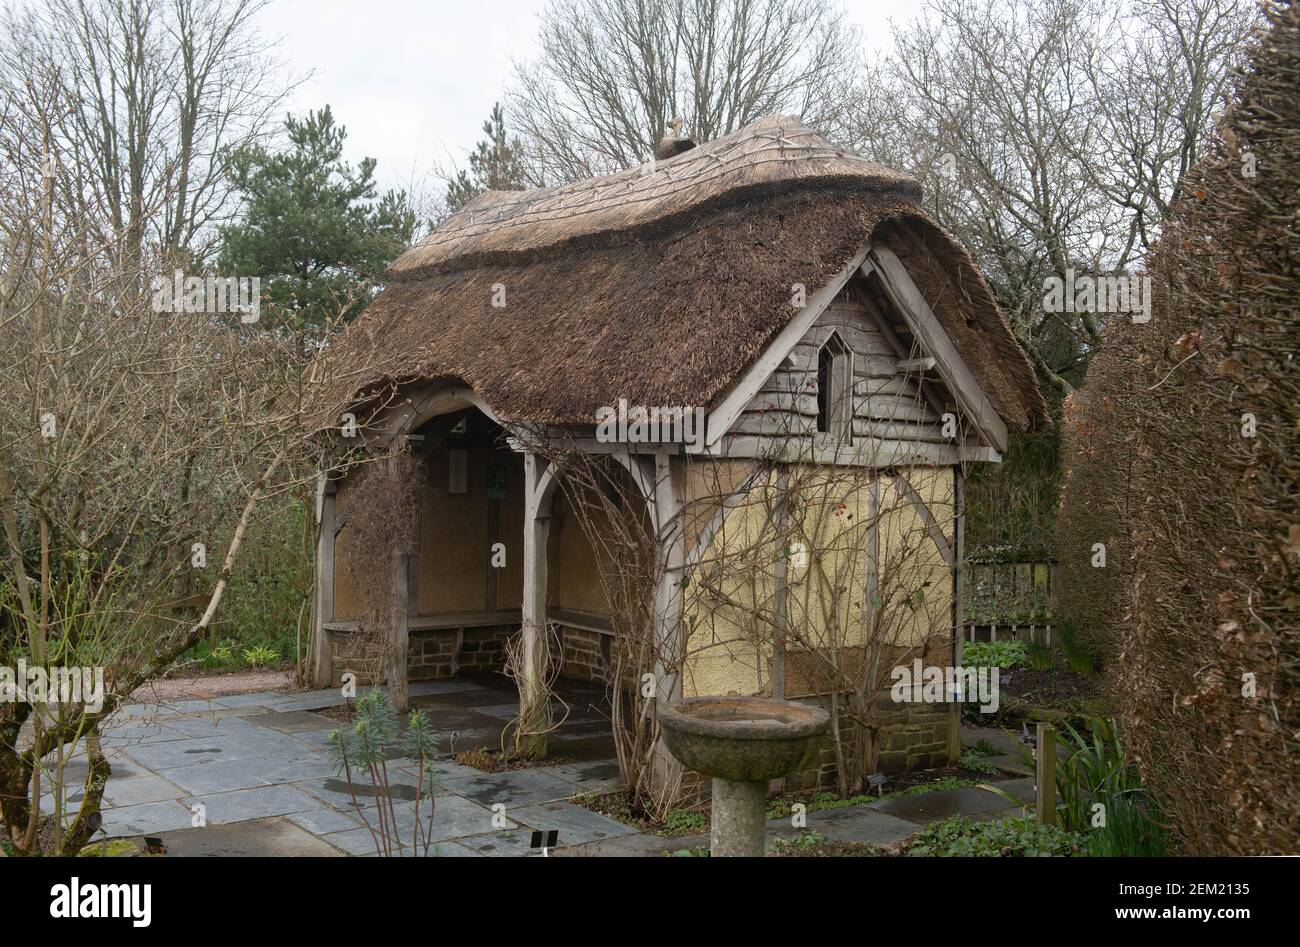 Traditional Thatched Roof Summerhouse on a Winter's Day in a Garden at Rosemoor in Rural Devon, England, UK Stock Photo